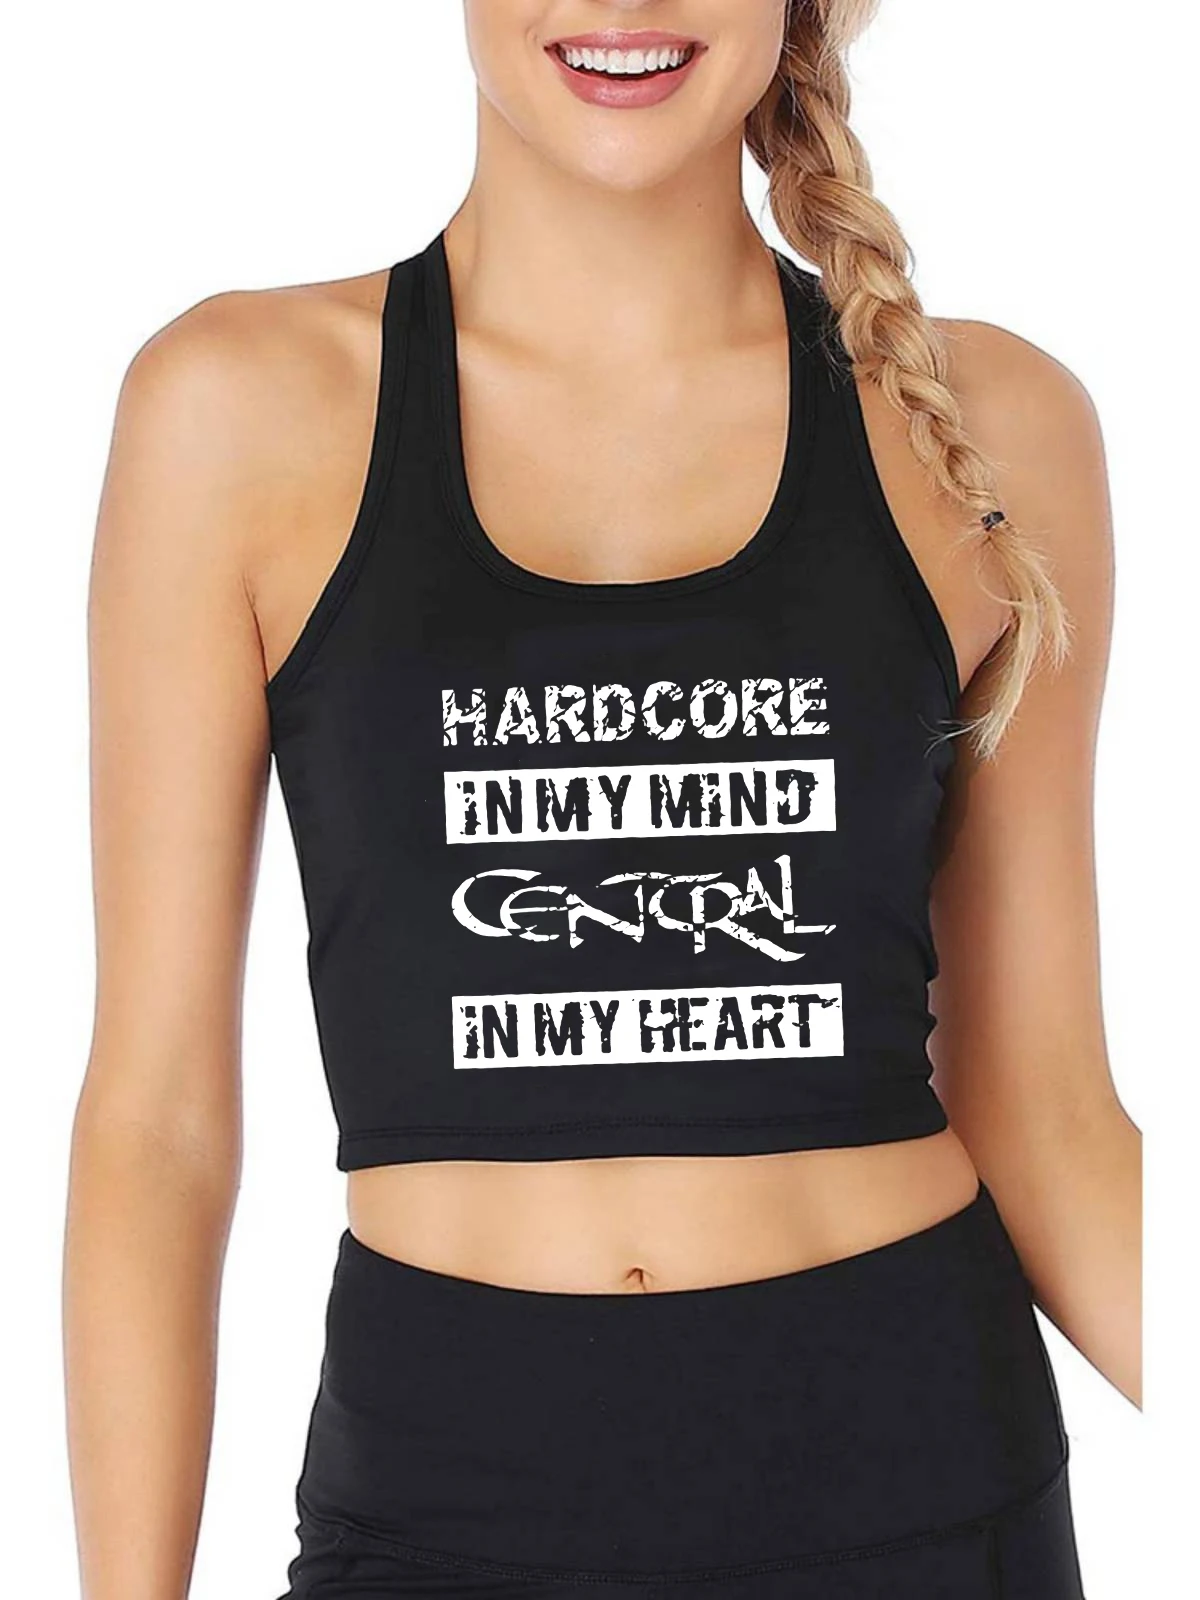 

Hardcore In My Mind Cencral In My Heart Graphics Crop Top Women's Sassy Sexy Slim Fit Tank Tops Customizable Camisole